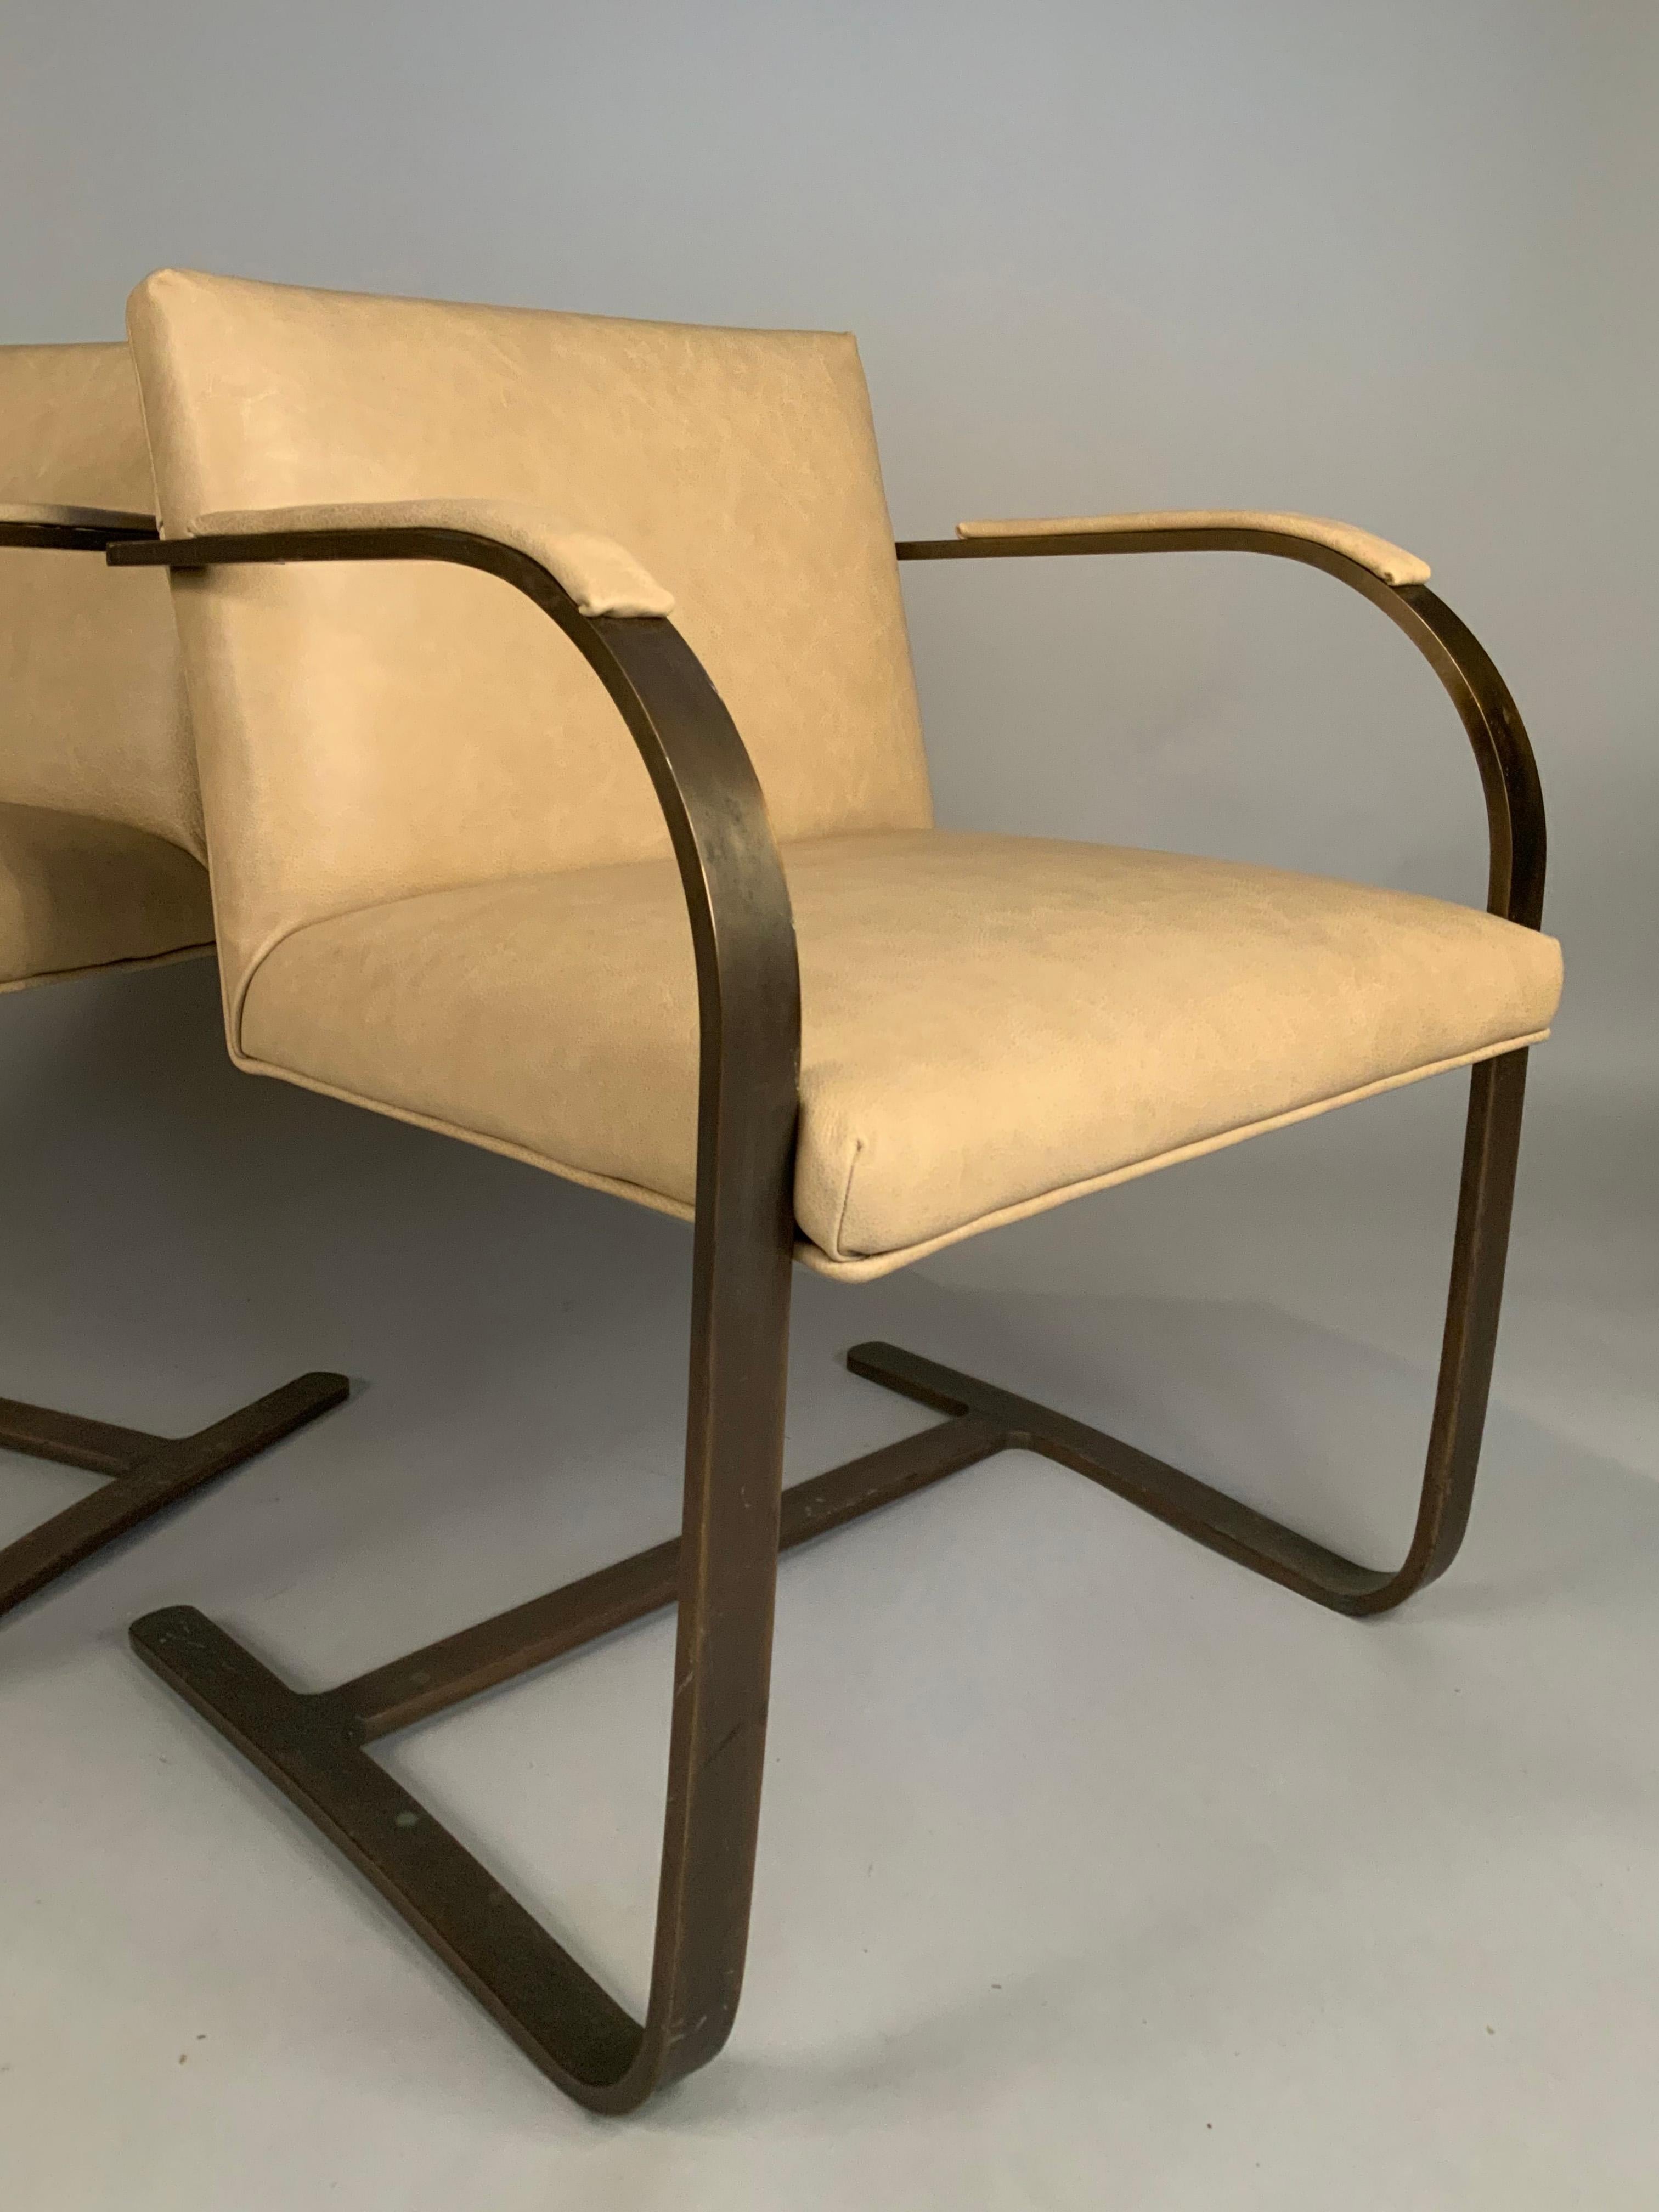 Mid-Century Modern Pair of Leather Brno Flat Bar Chairs by Mies Van der Rohe for Knoll